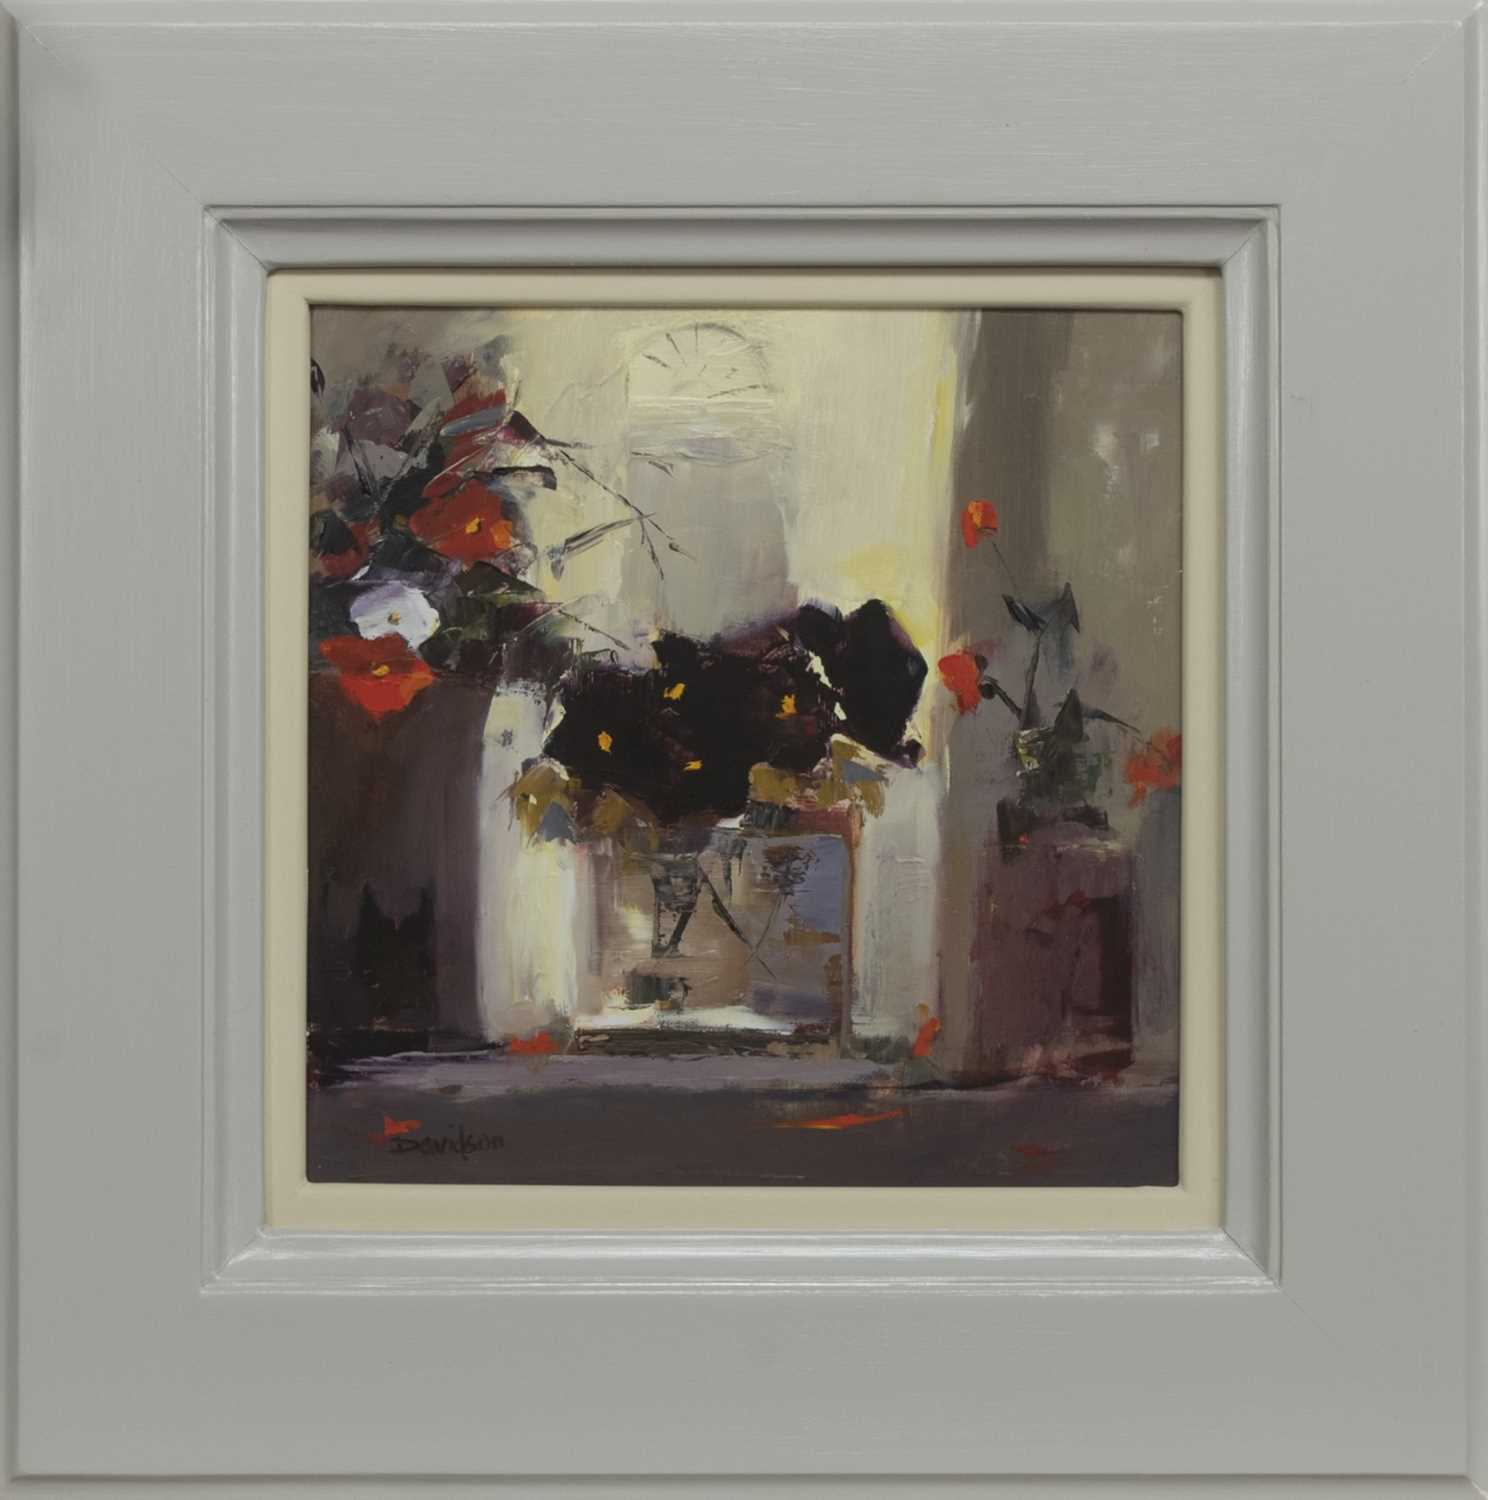 Lot 530 - PANSIES WITH GLASS VASE, AN OIL BY MARY DAVIDSON